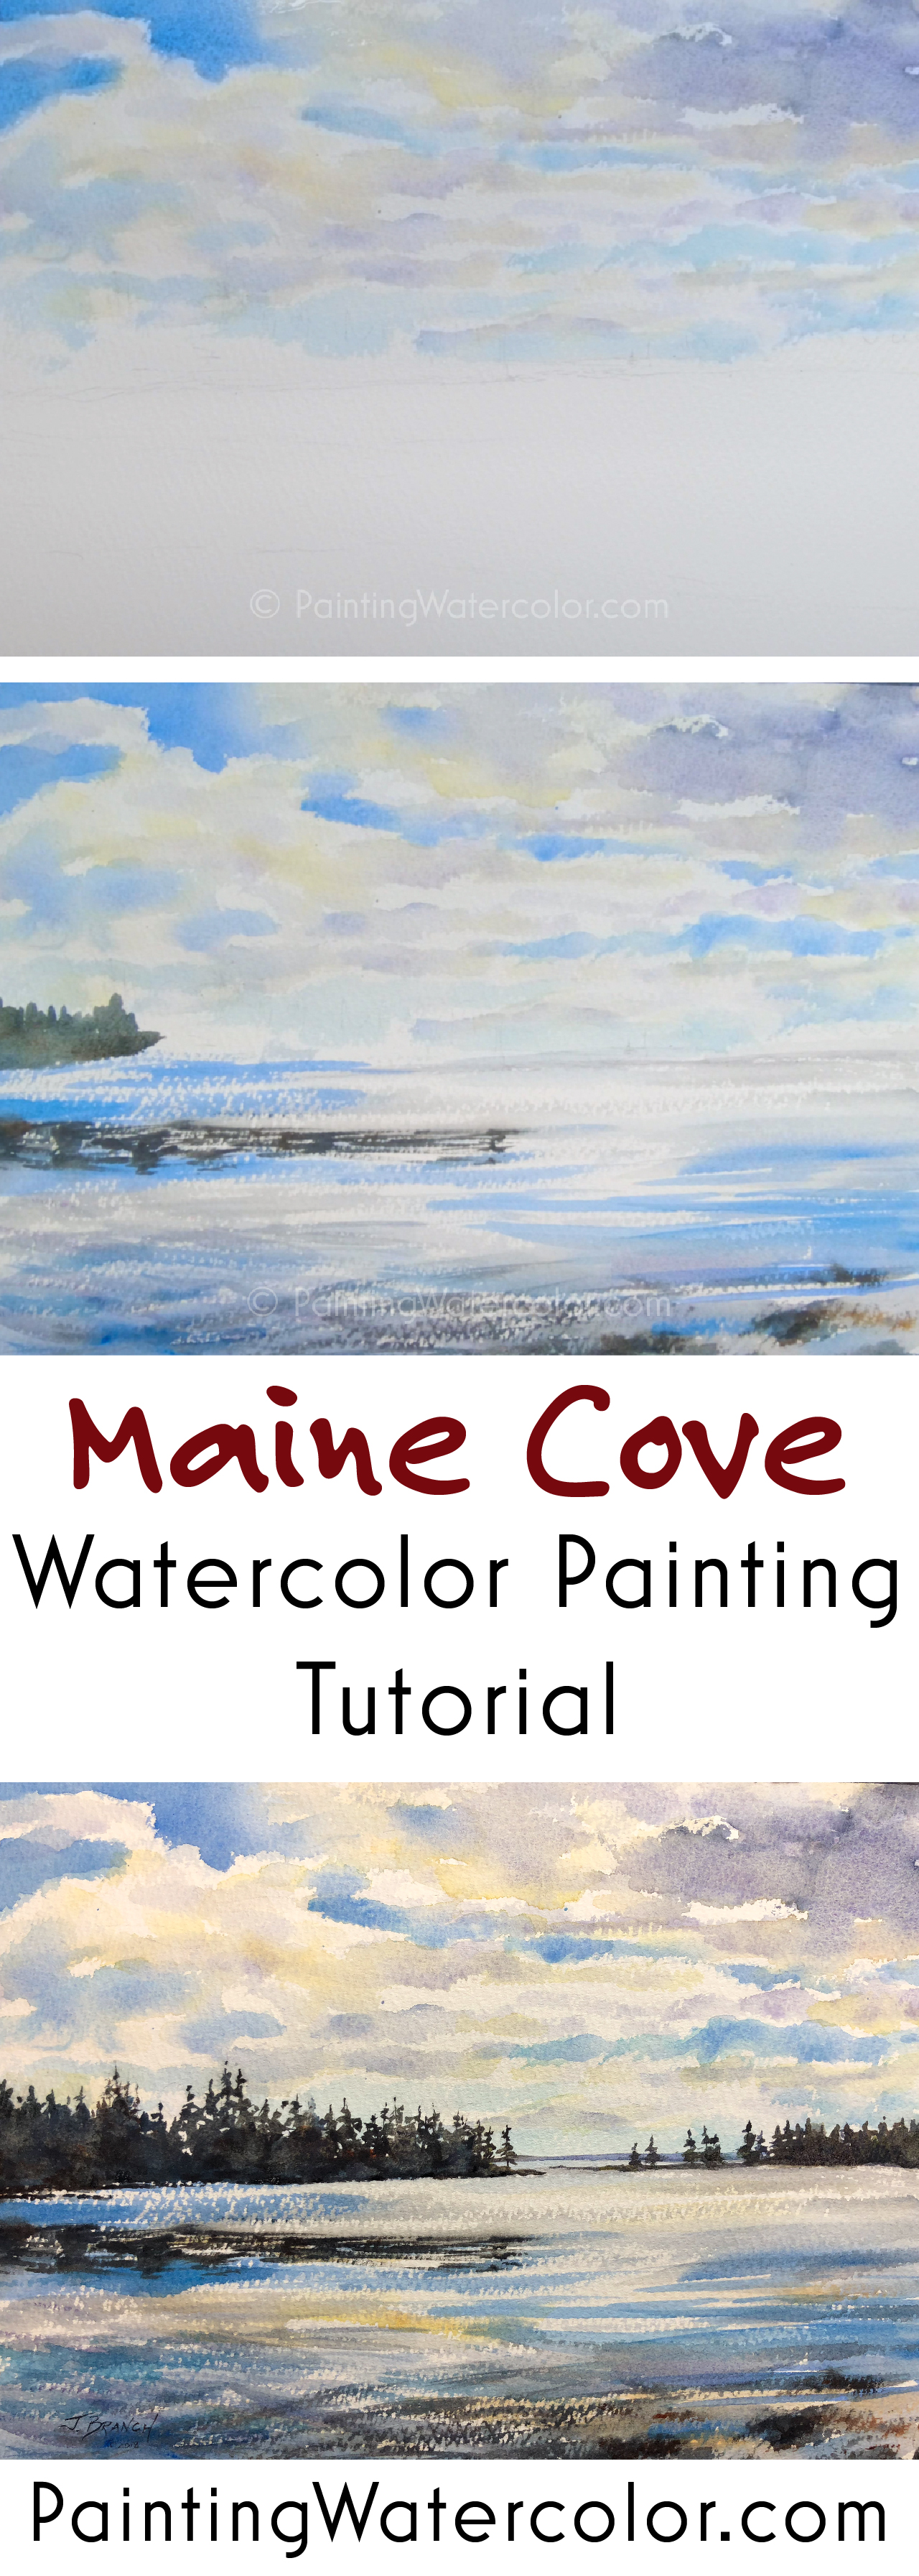 Maine Cove Painting Tutorial watercolor painting tutorial by Jennifer Branch